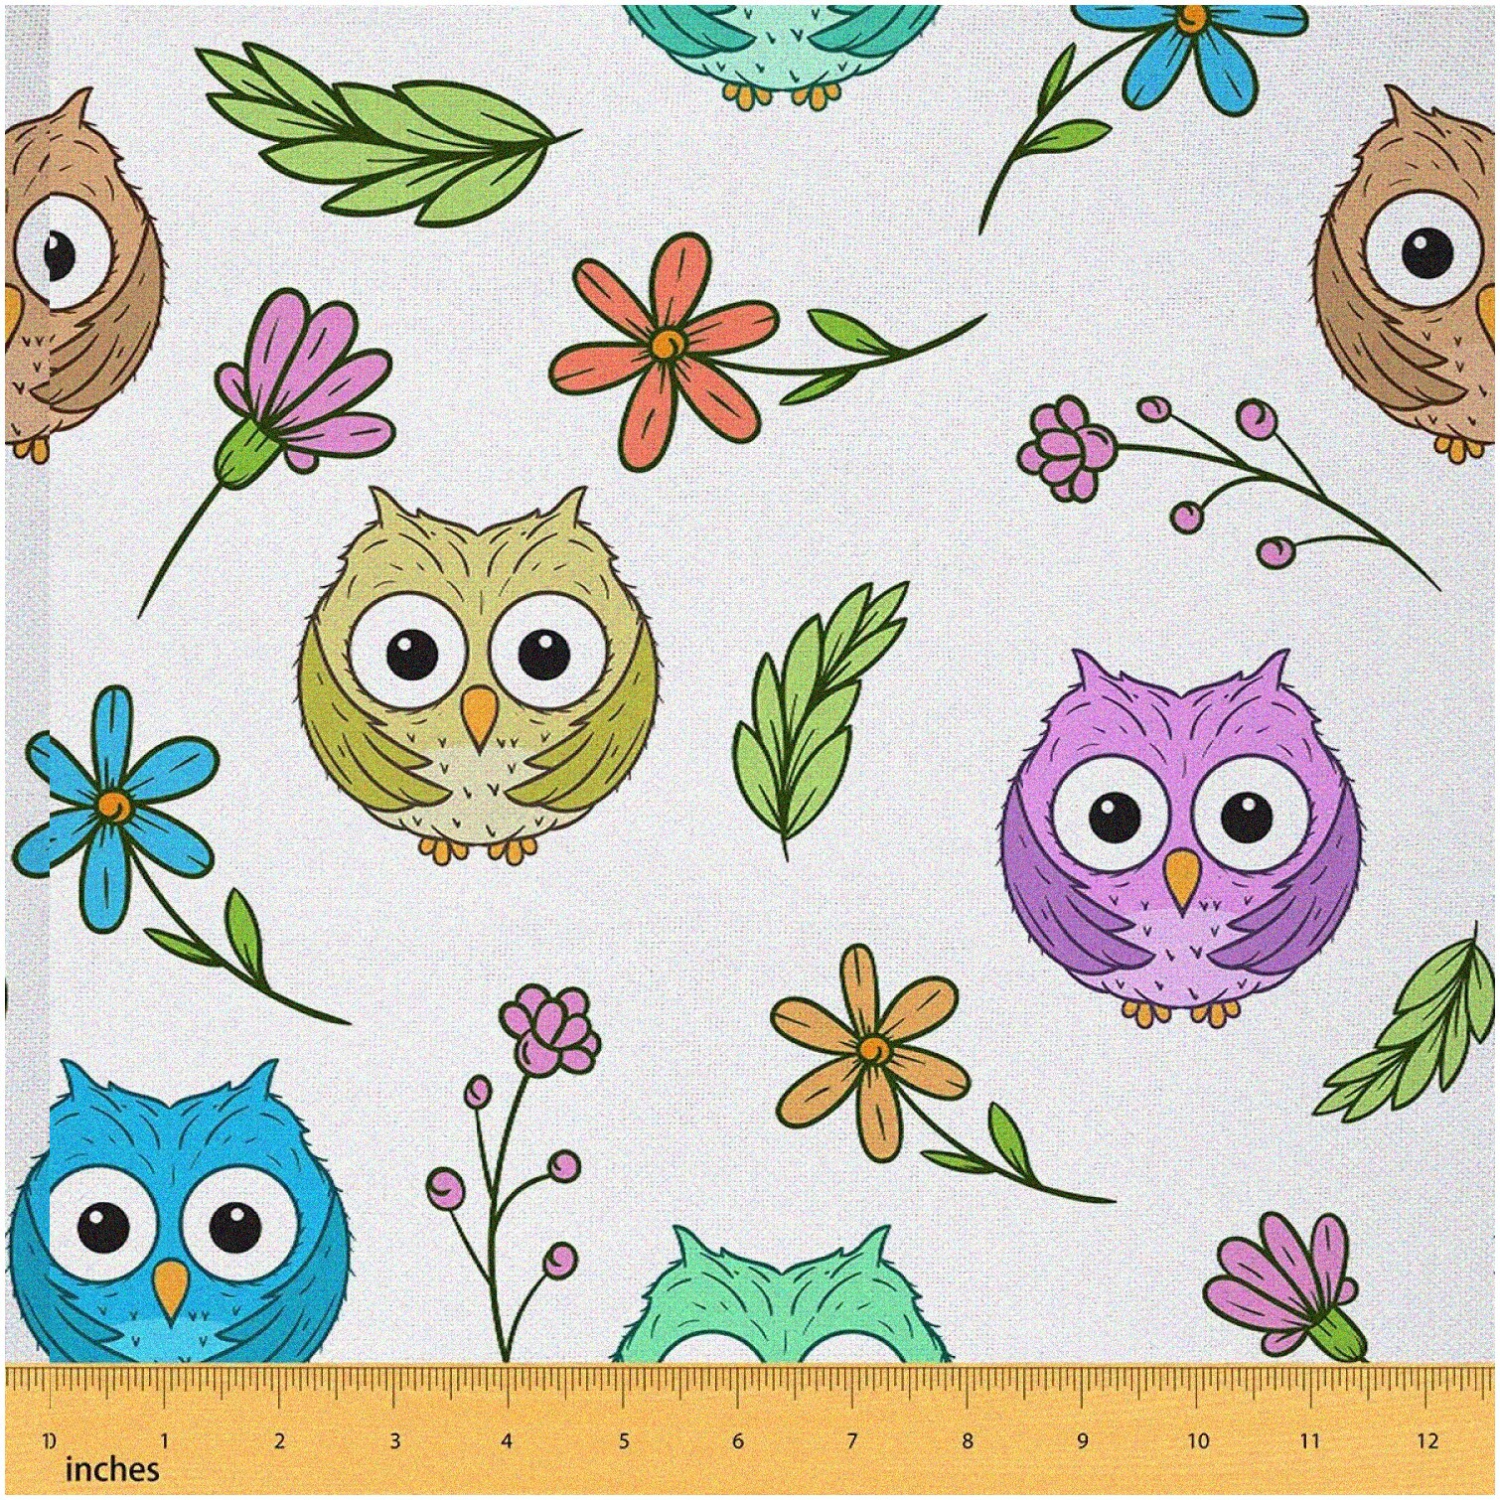 WhimsyFeathers Fabric - Adorable Owl & Bird Print for DIY Upholstery & Sewing Projects - Water-Resistant & Floral Accents - Sold by the Yard! #WhimsyFeathers #DIYupholstery #Cartoo